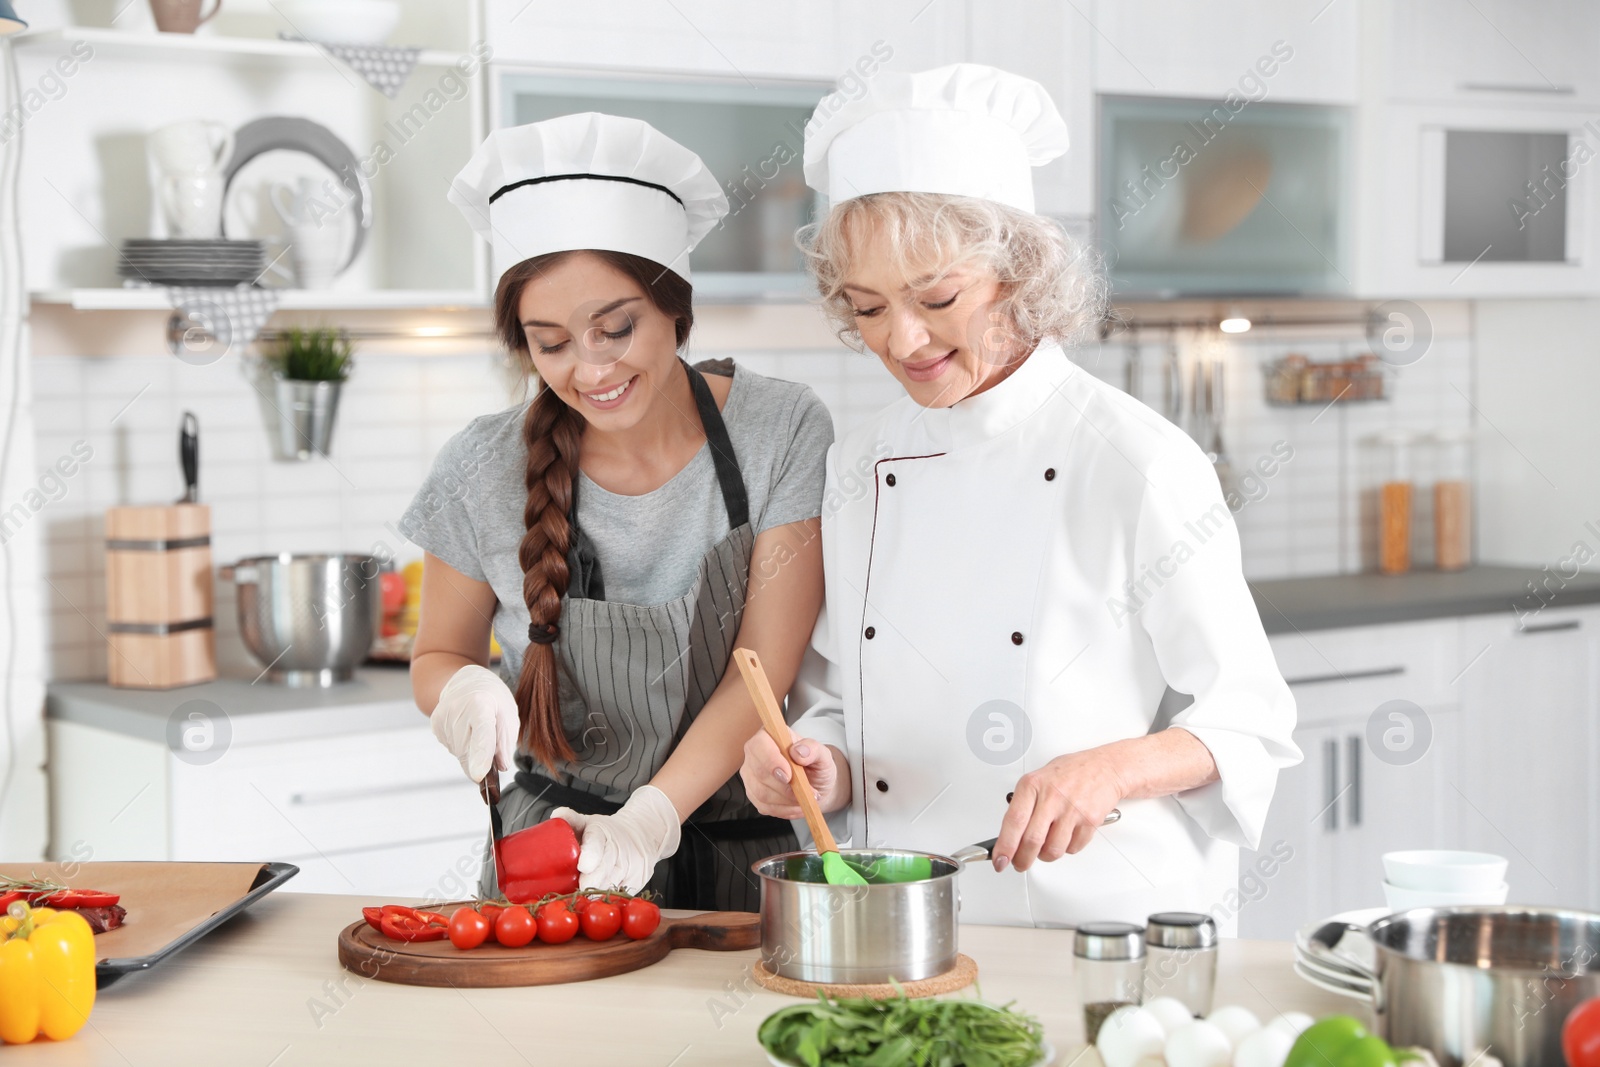 Photo of Professional chef and trainee working together in kitchen